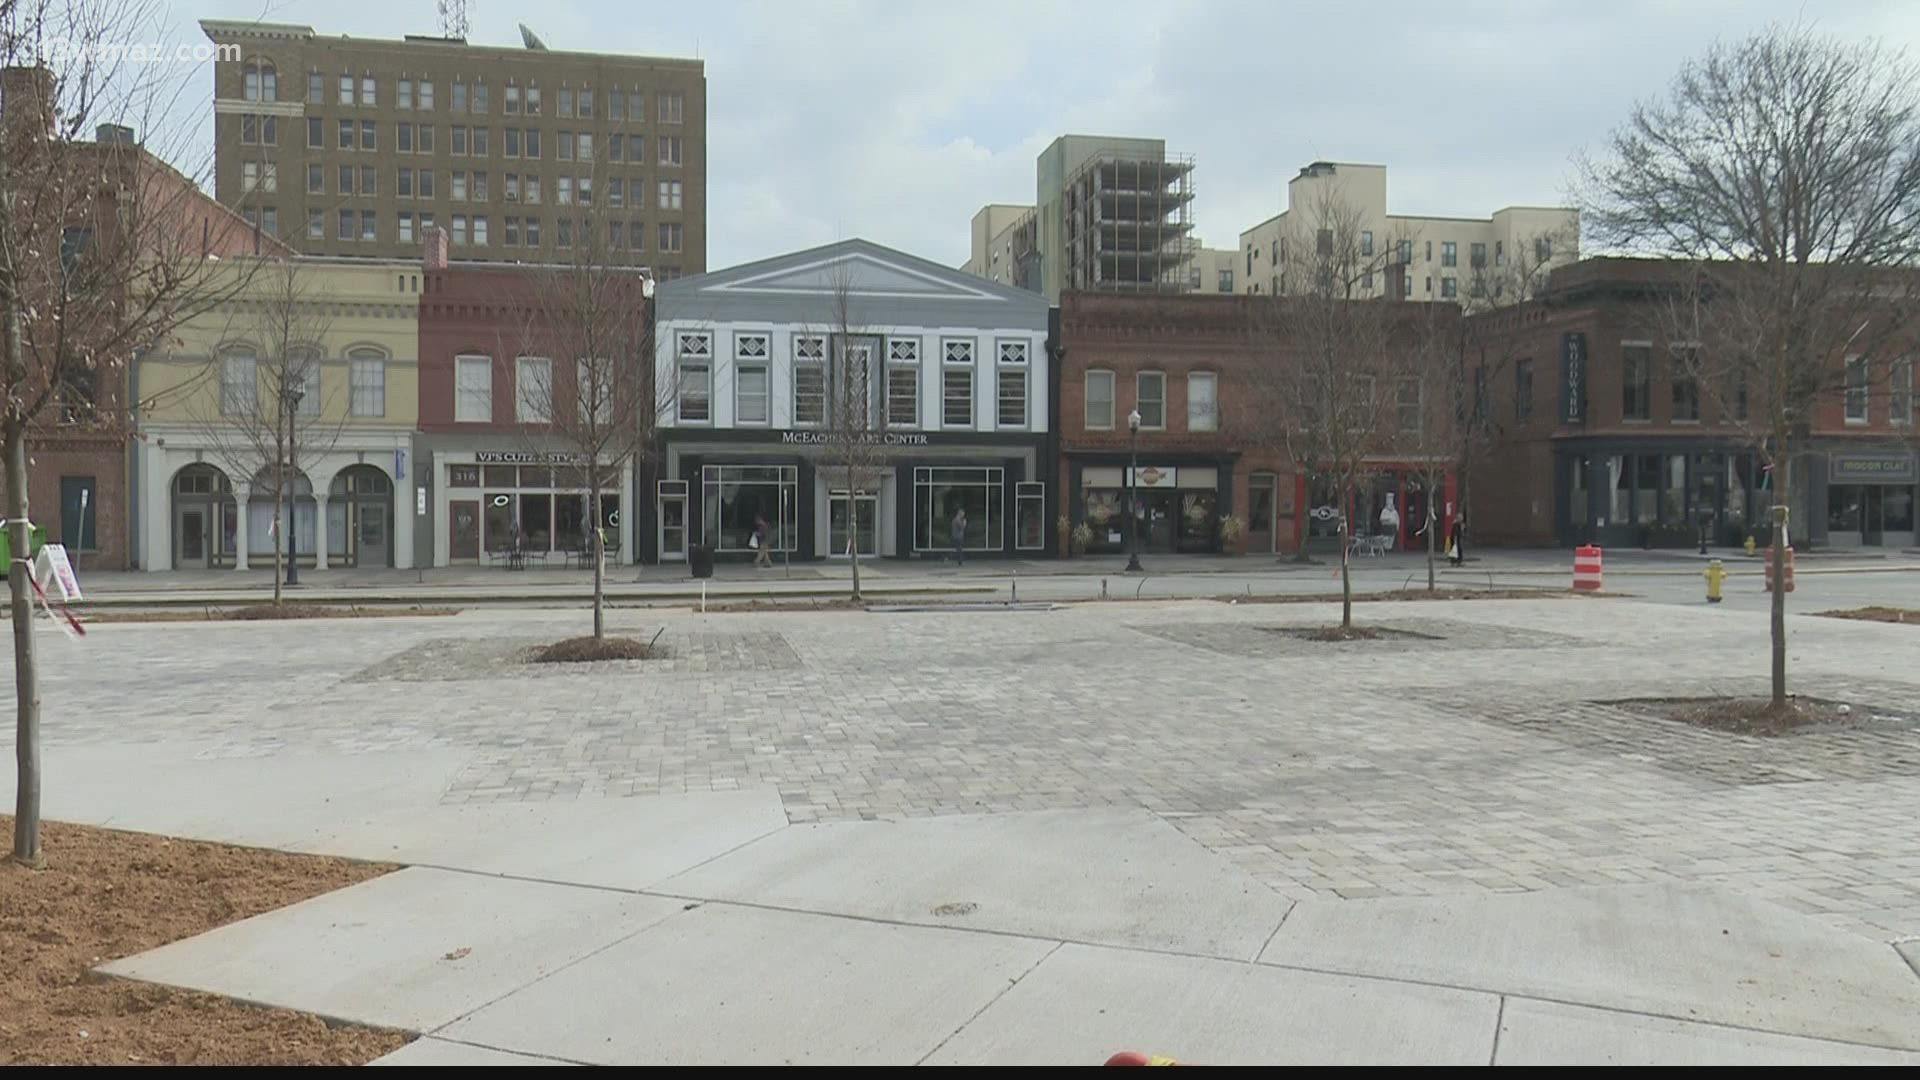 As downtown Macon continues to grow, more space is needed for pedestrians to walk and cross streets safely